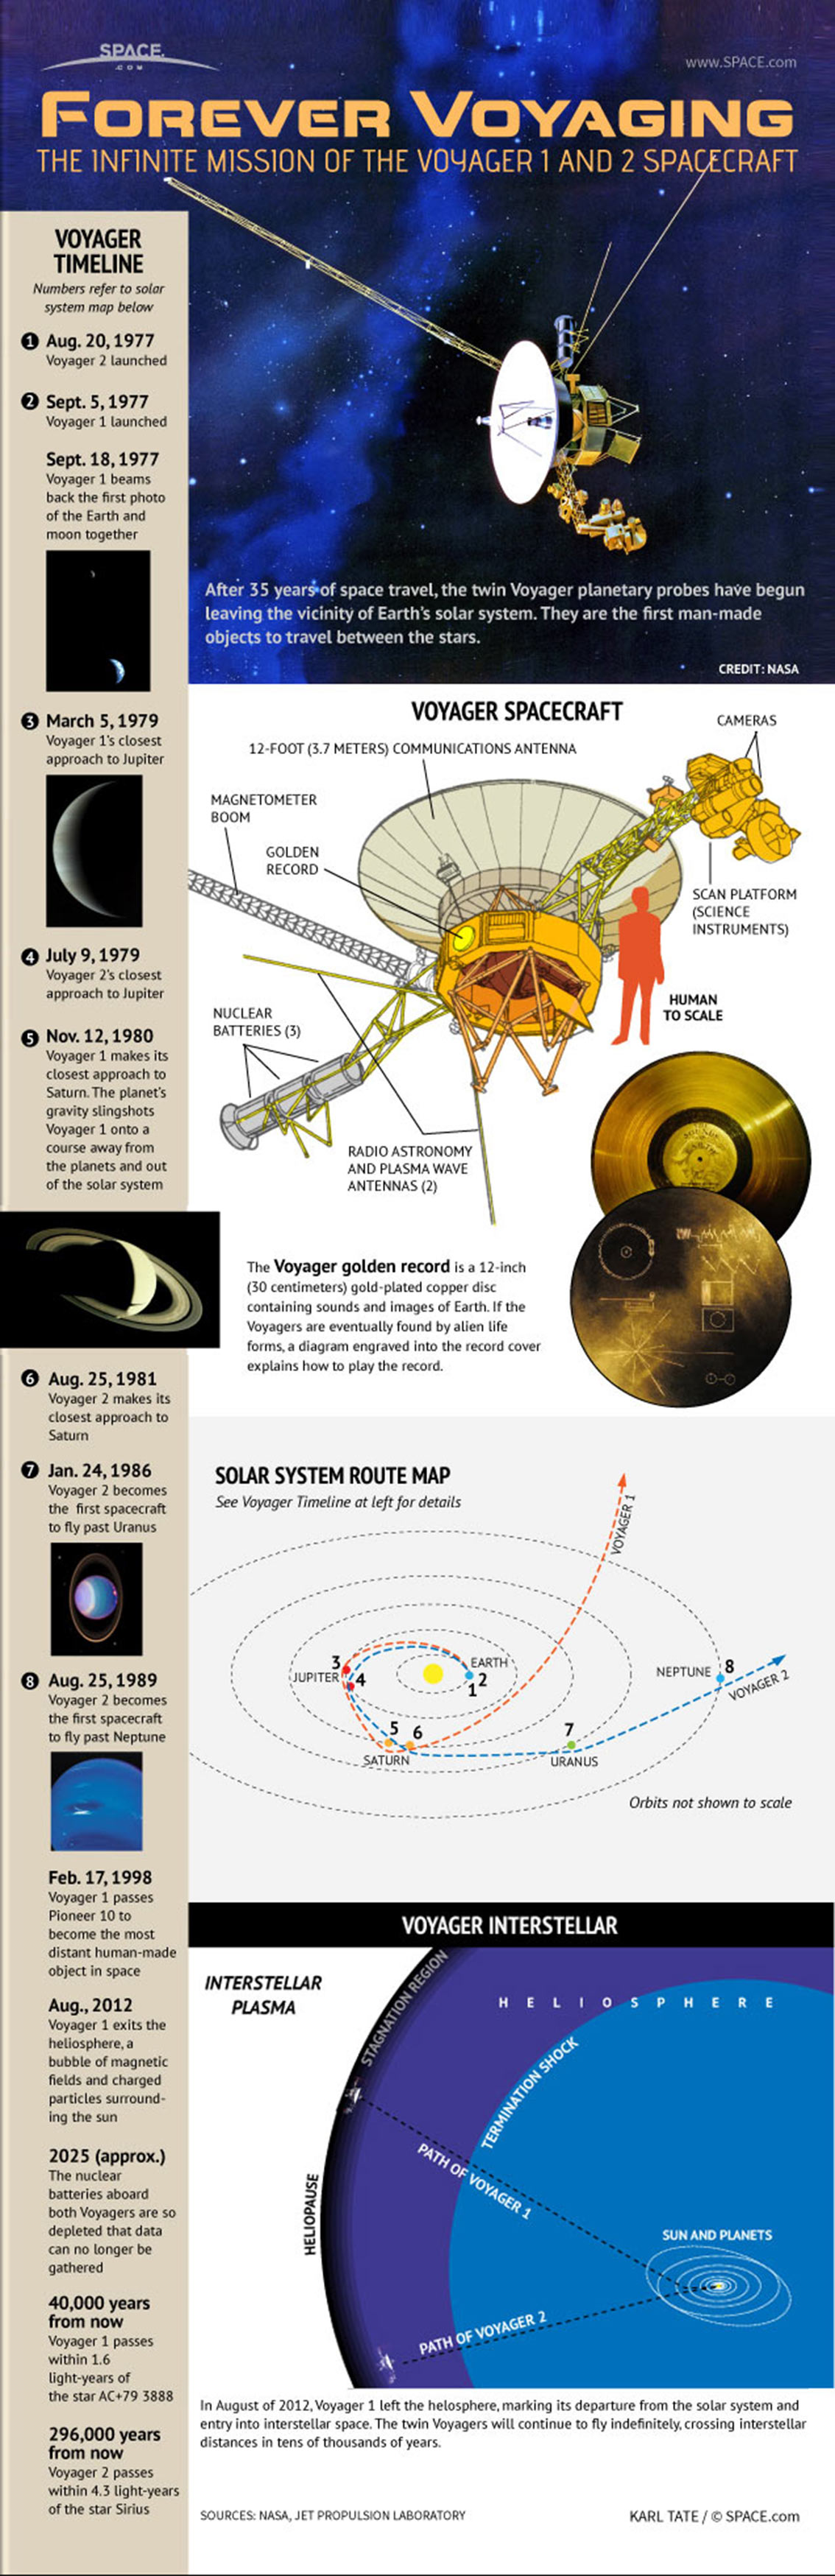 Voyager 1 - The Farthest Spacecraft From Earth Infographic